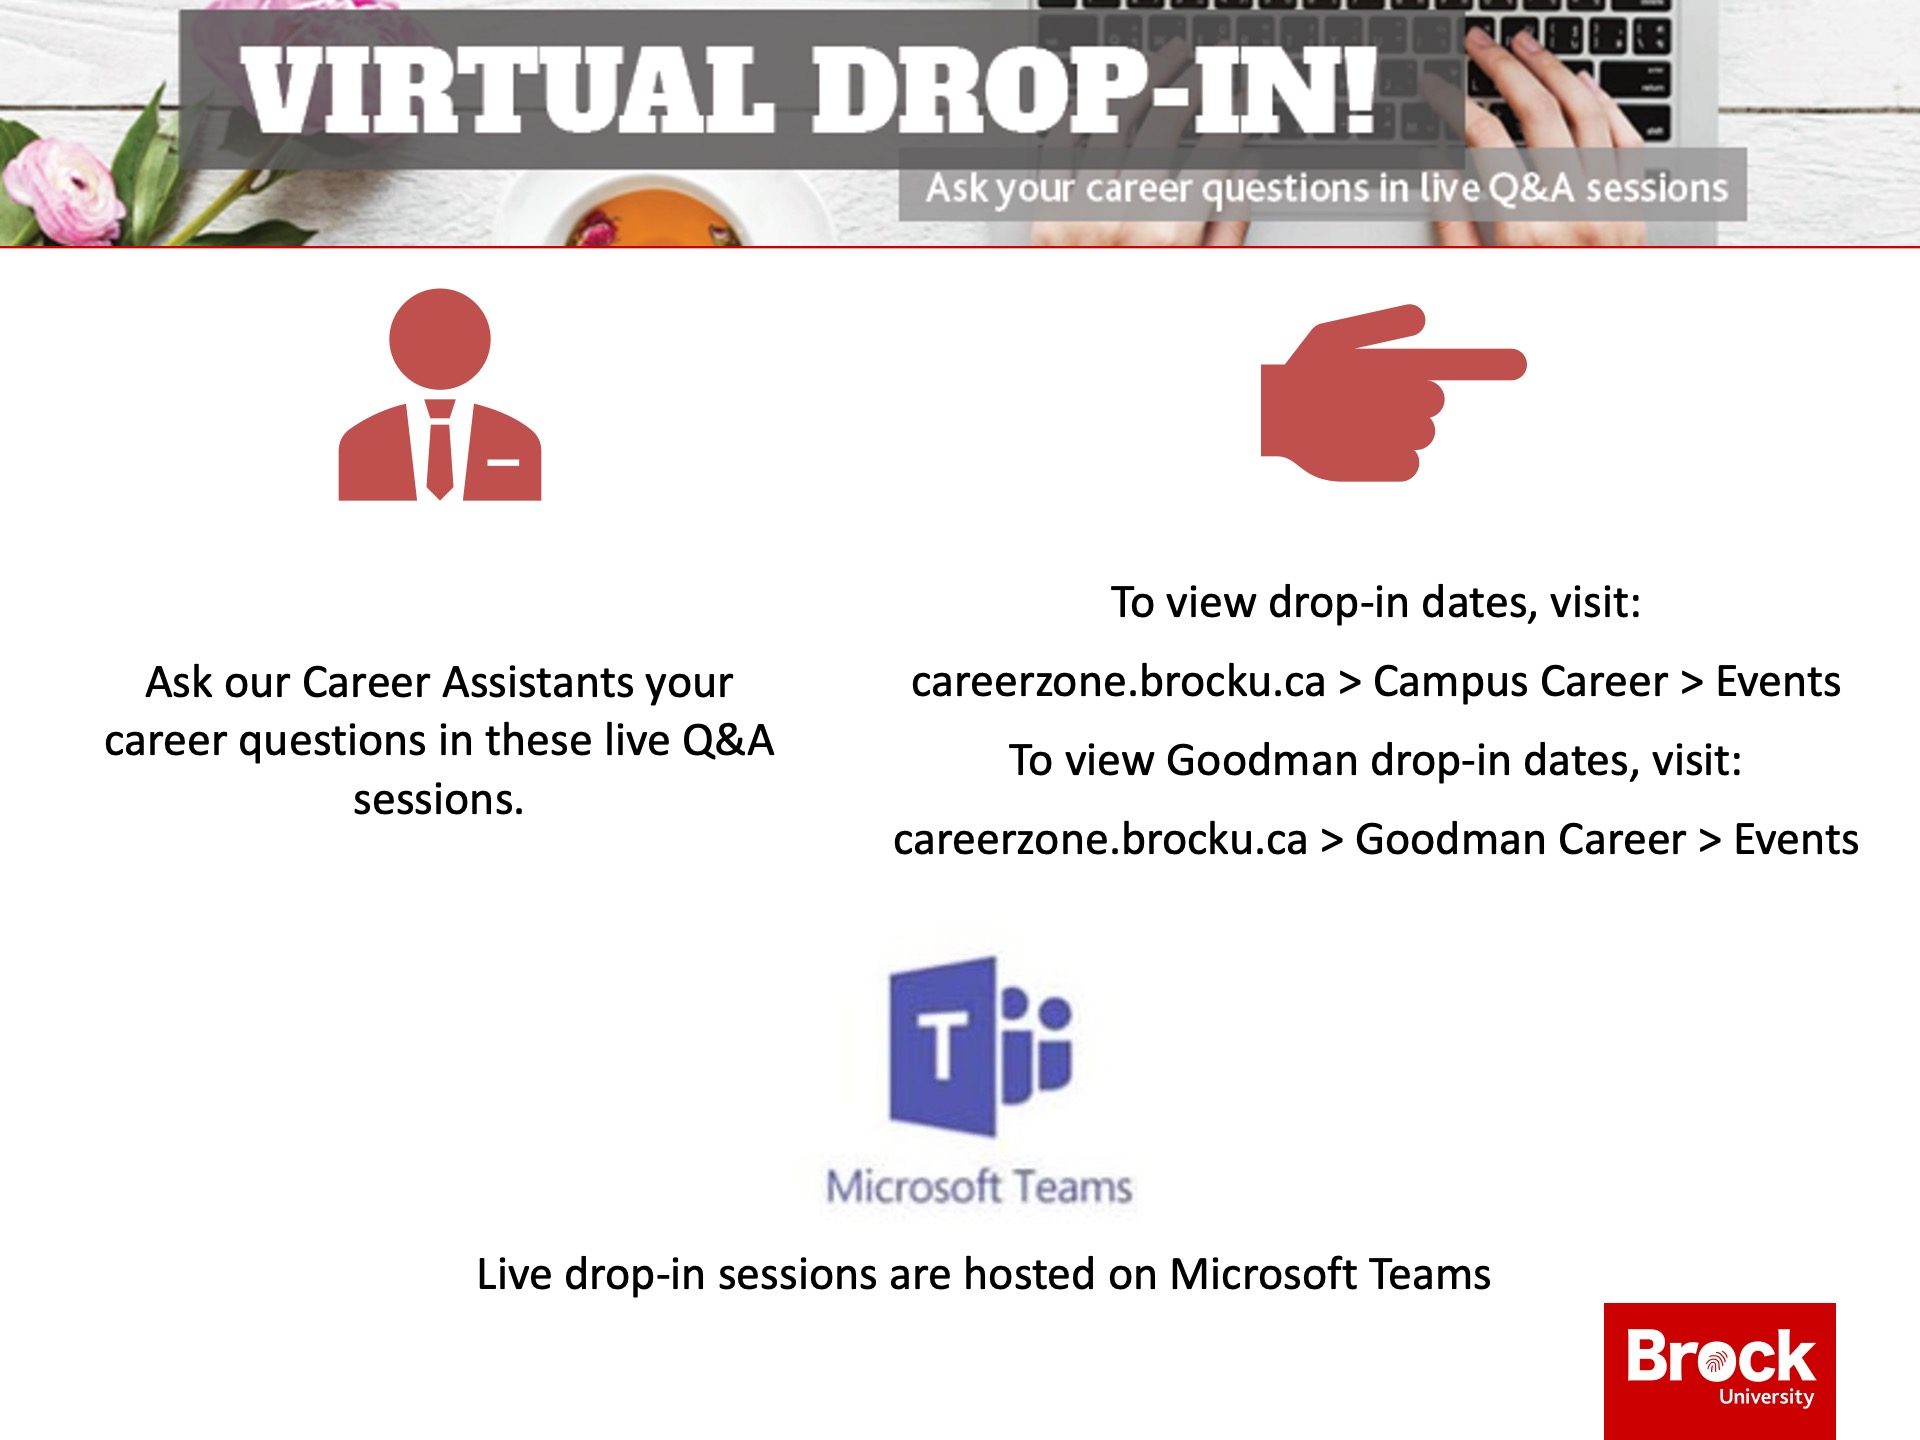 Information about virtual drop-in